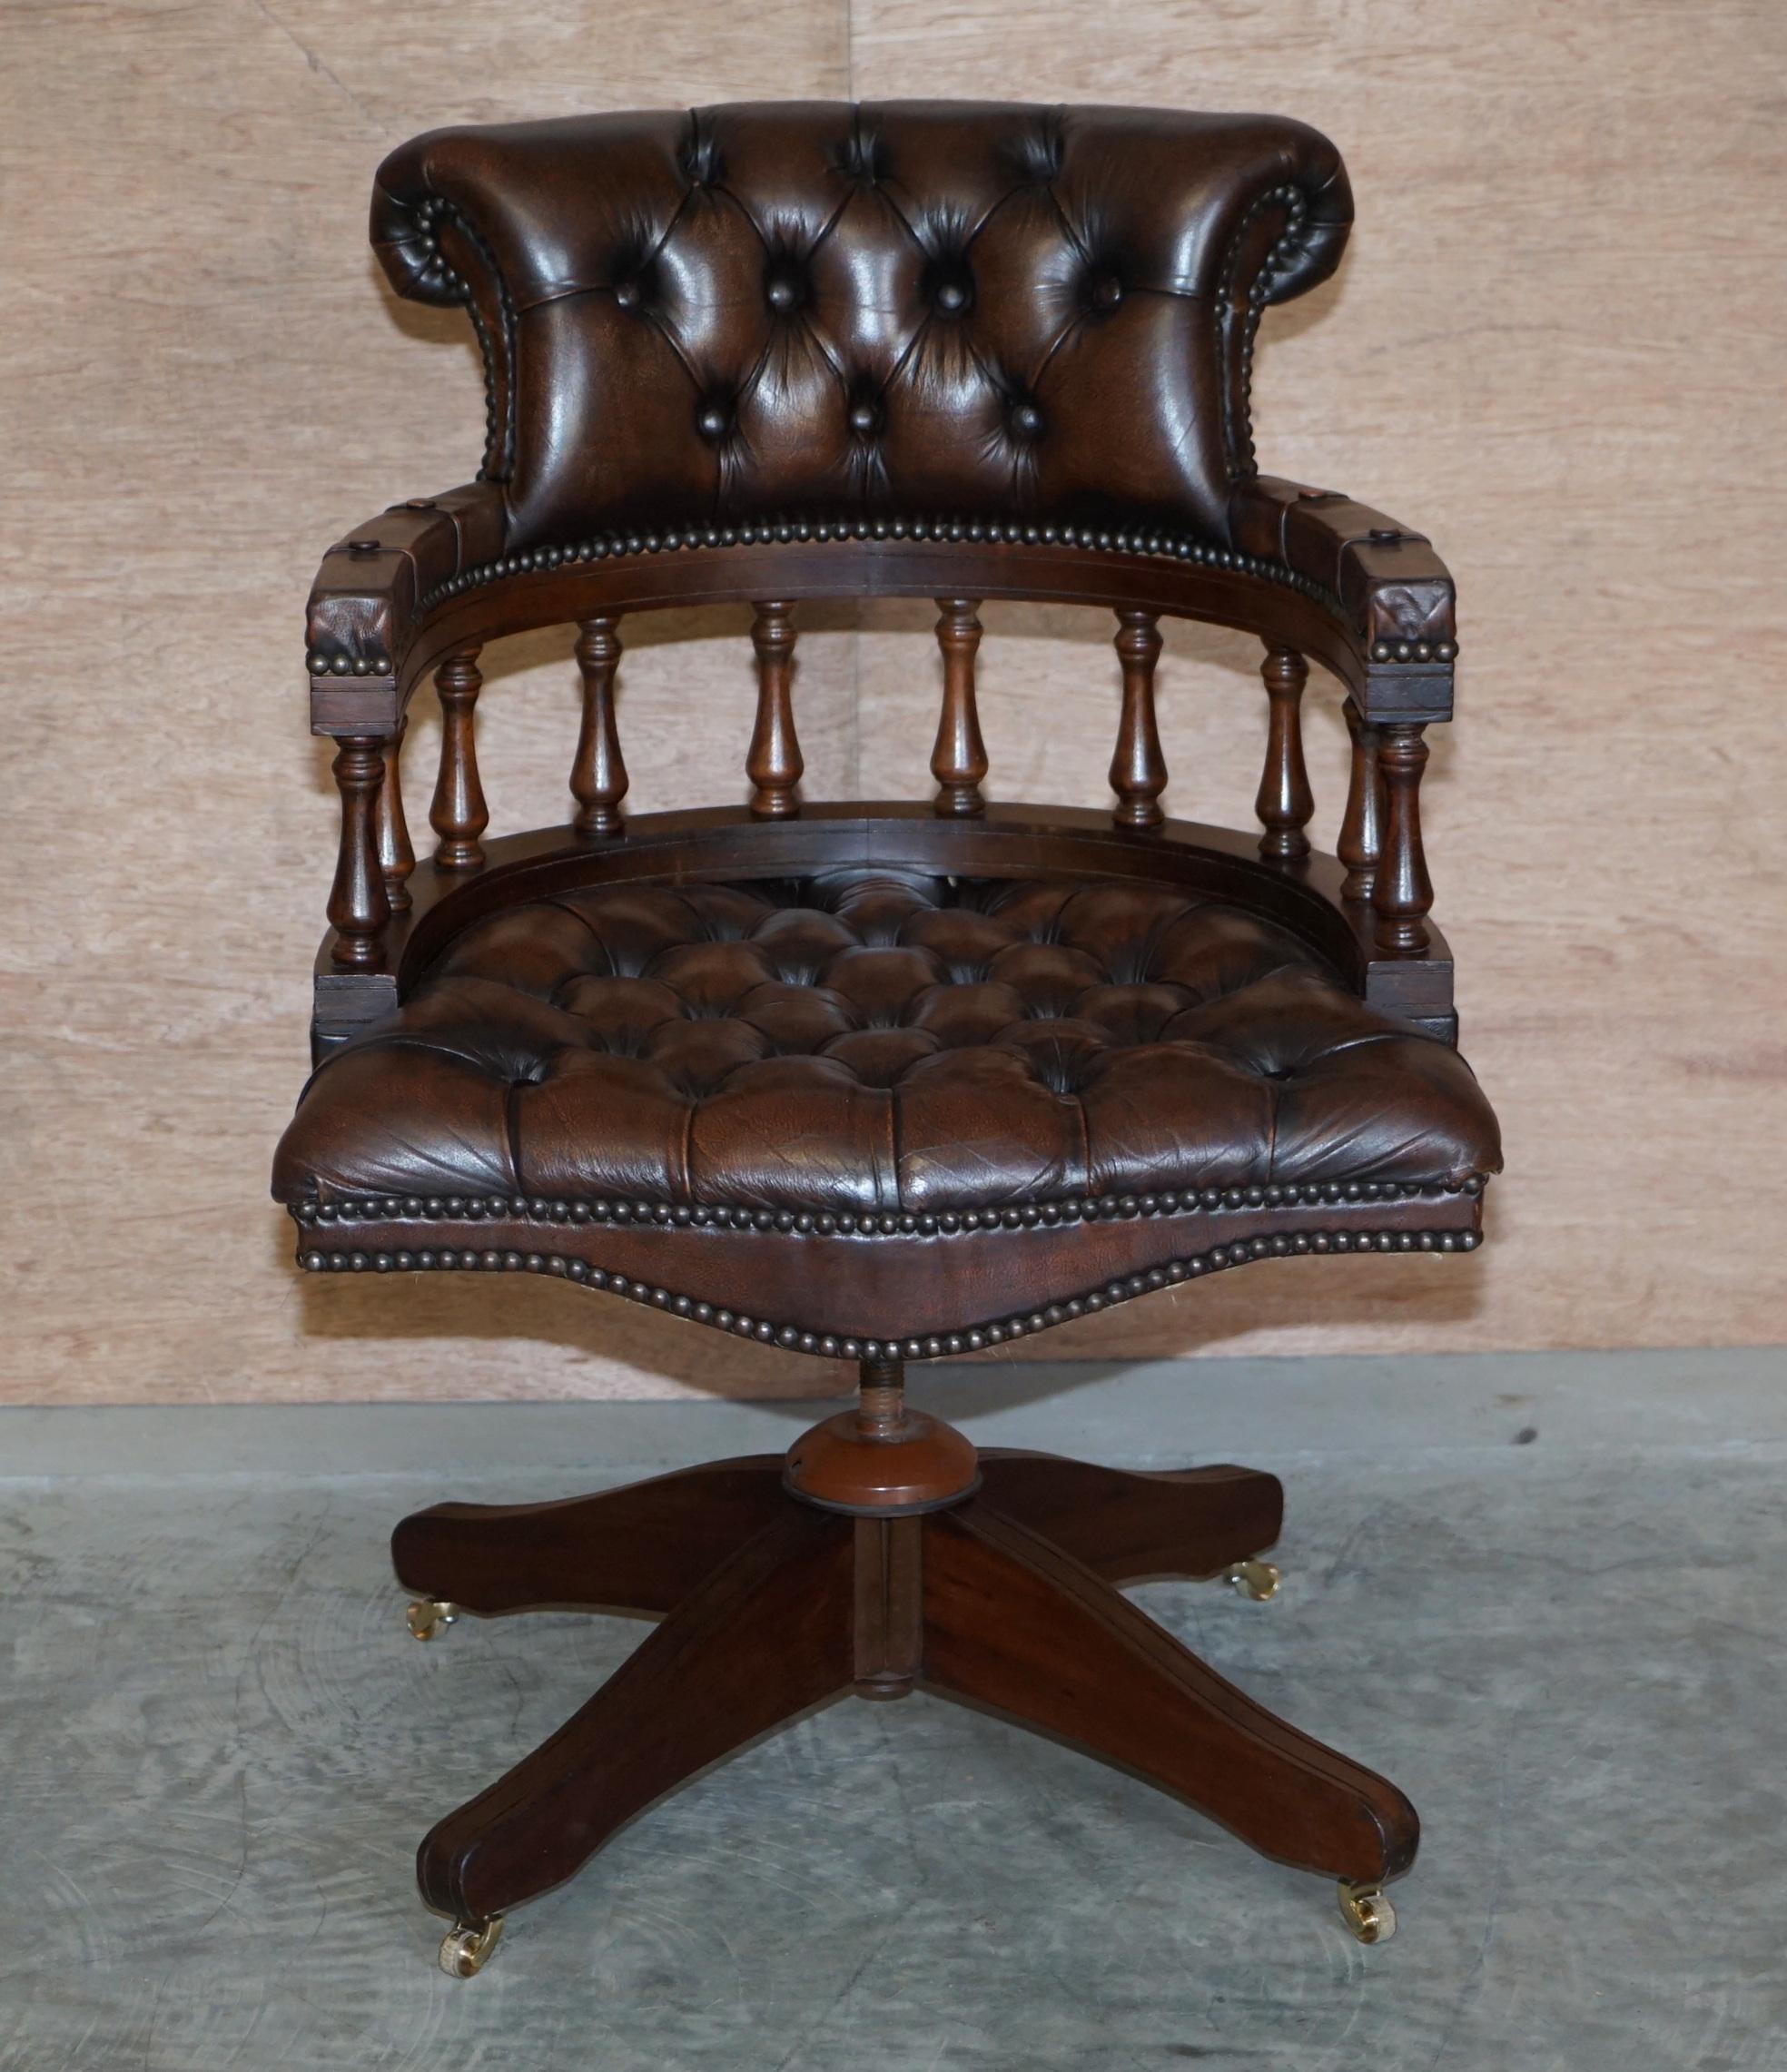 We are delighted to offer for sale this lovely original vintage hand dyed Chestnut brown leather Chesterfield tufted captains chair with coil tension base

A very good looking well made and comfortable directors chair. Its chesterfield buttoned